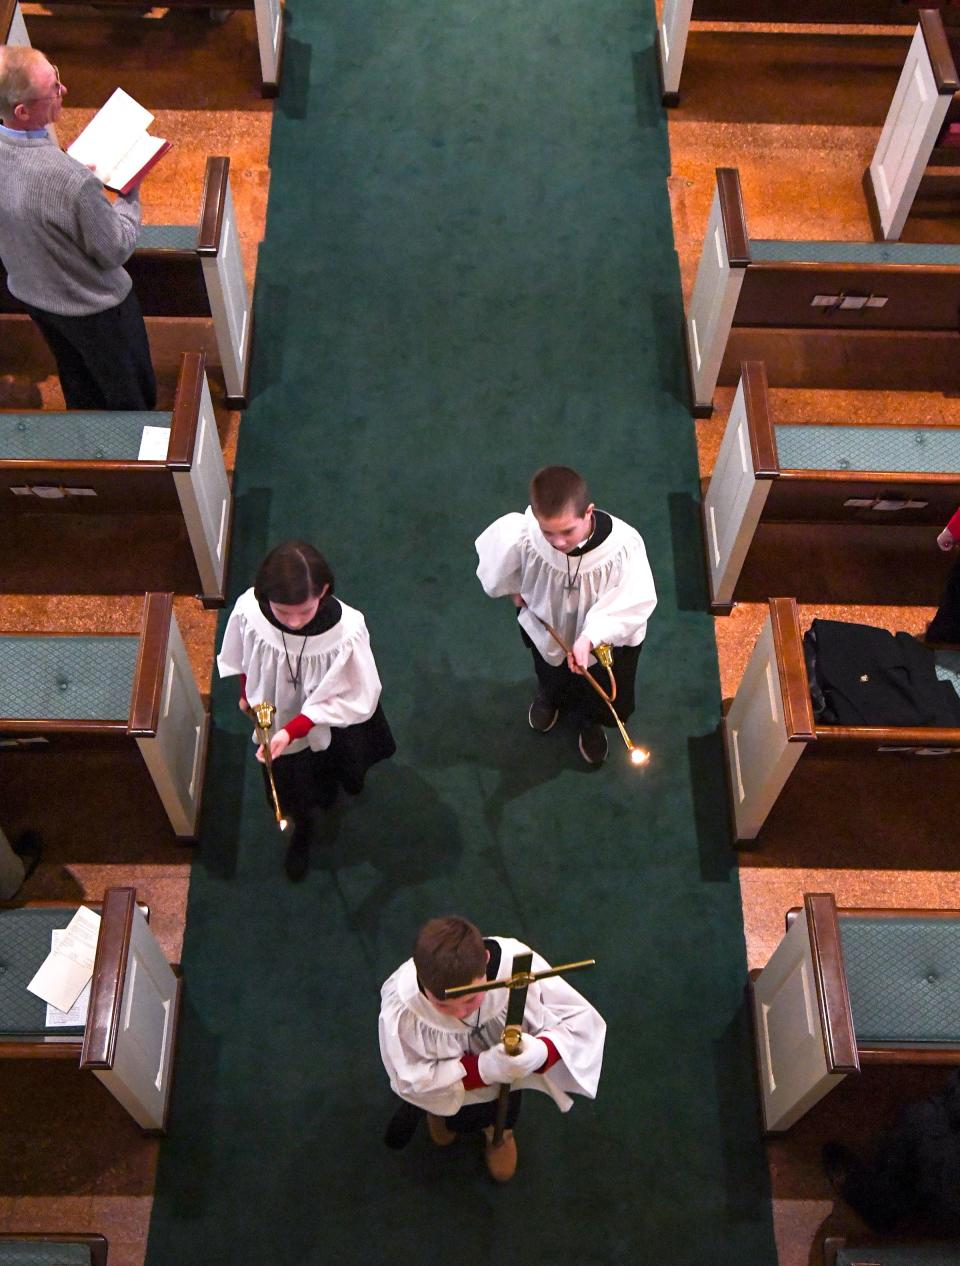 One of the nation's largest religious denominations will vote on whether to ordain openly gay clergy and allow churches to conduct same-sex marriages.